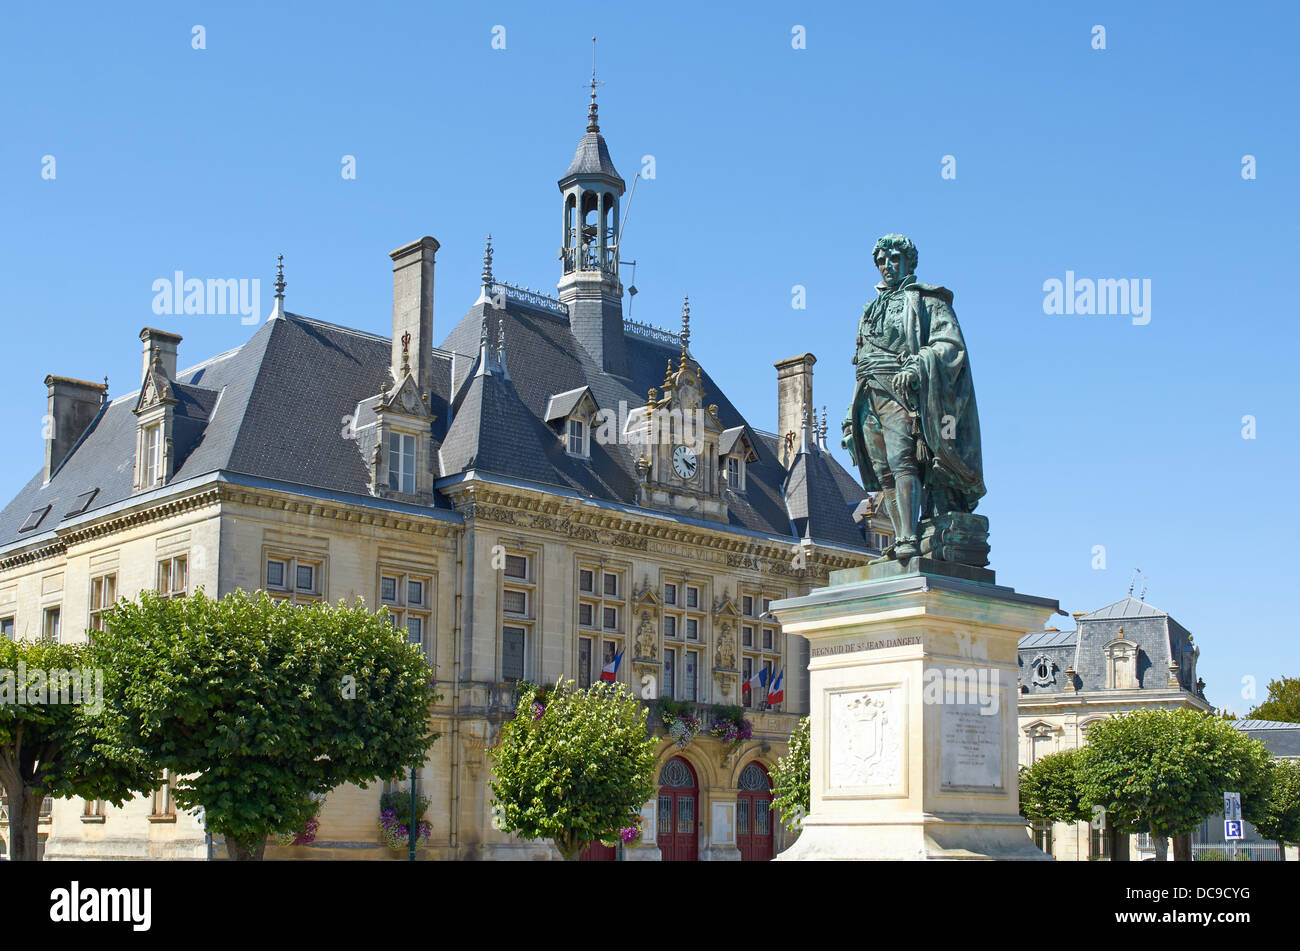 St jean dangely hi-res stock photography and images - Alamy